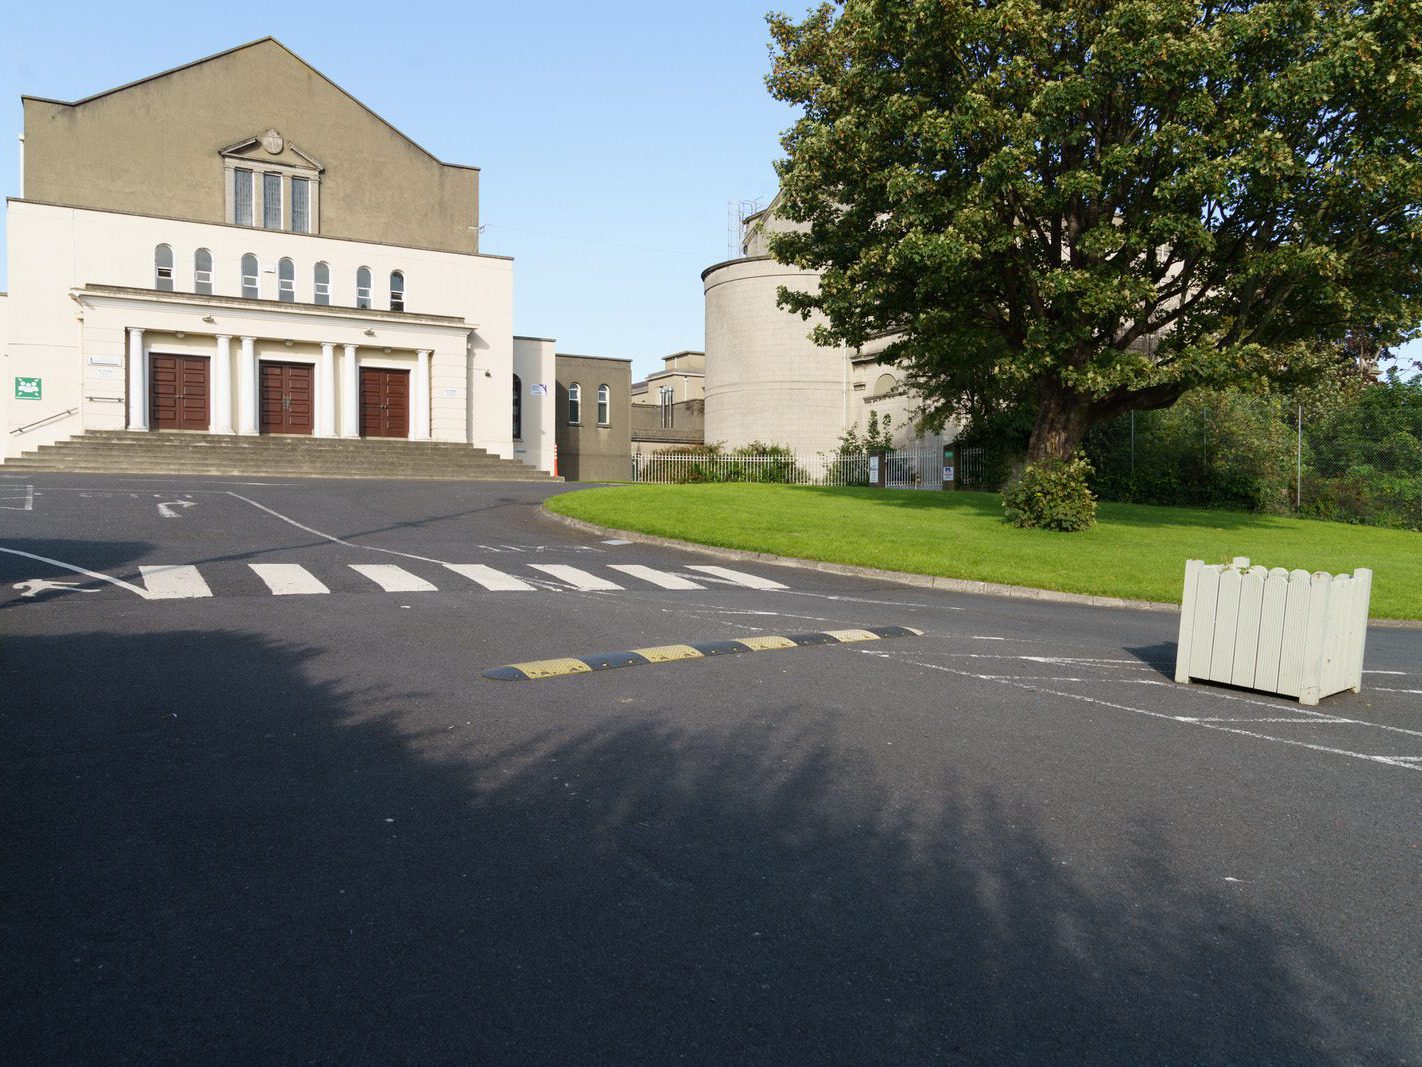 HOLY CROSS COLLEGE - ALSO KNOWN AS CLONLIFFE COLLEGE [THIS HAS CEASED SINCE MY LAST VISIT IN 2014] 016